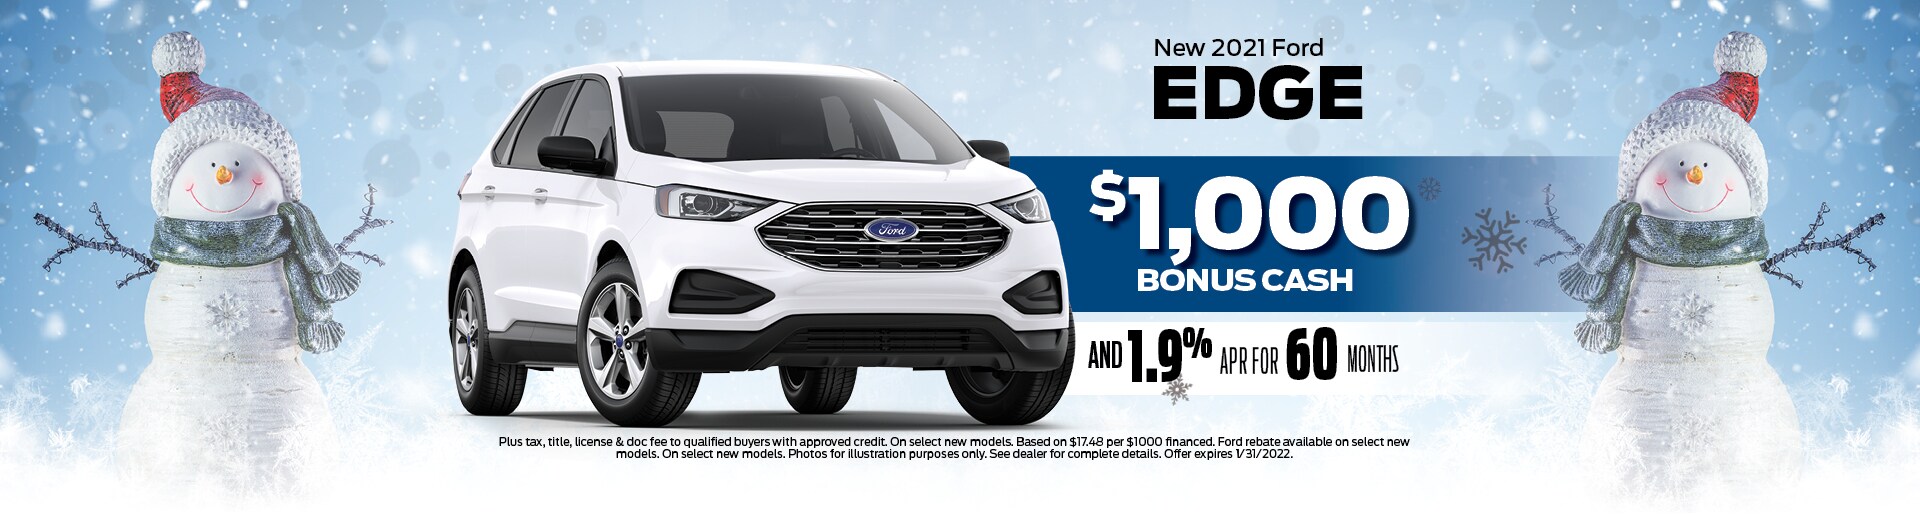 New 2021 Ford Edge with $1,000 bonus cash and 1.9% APR for 60 months | Ellsworth, WI